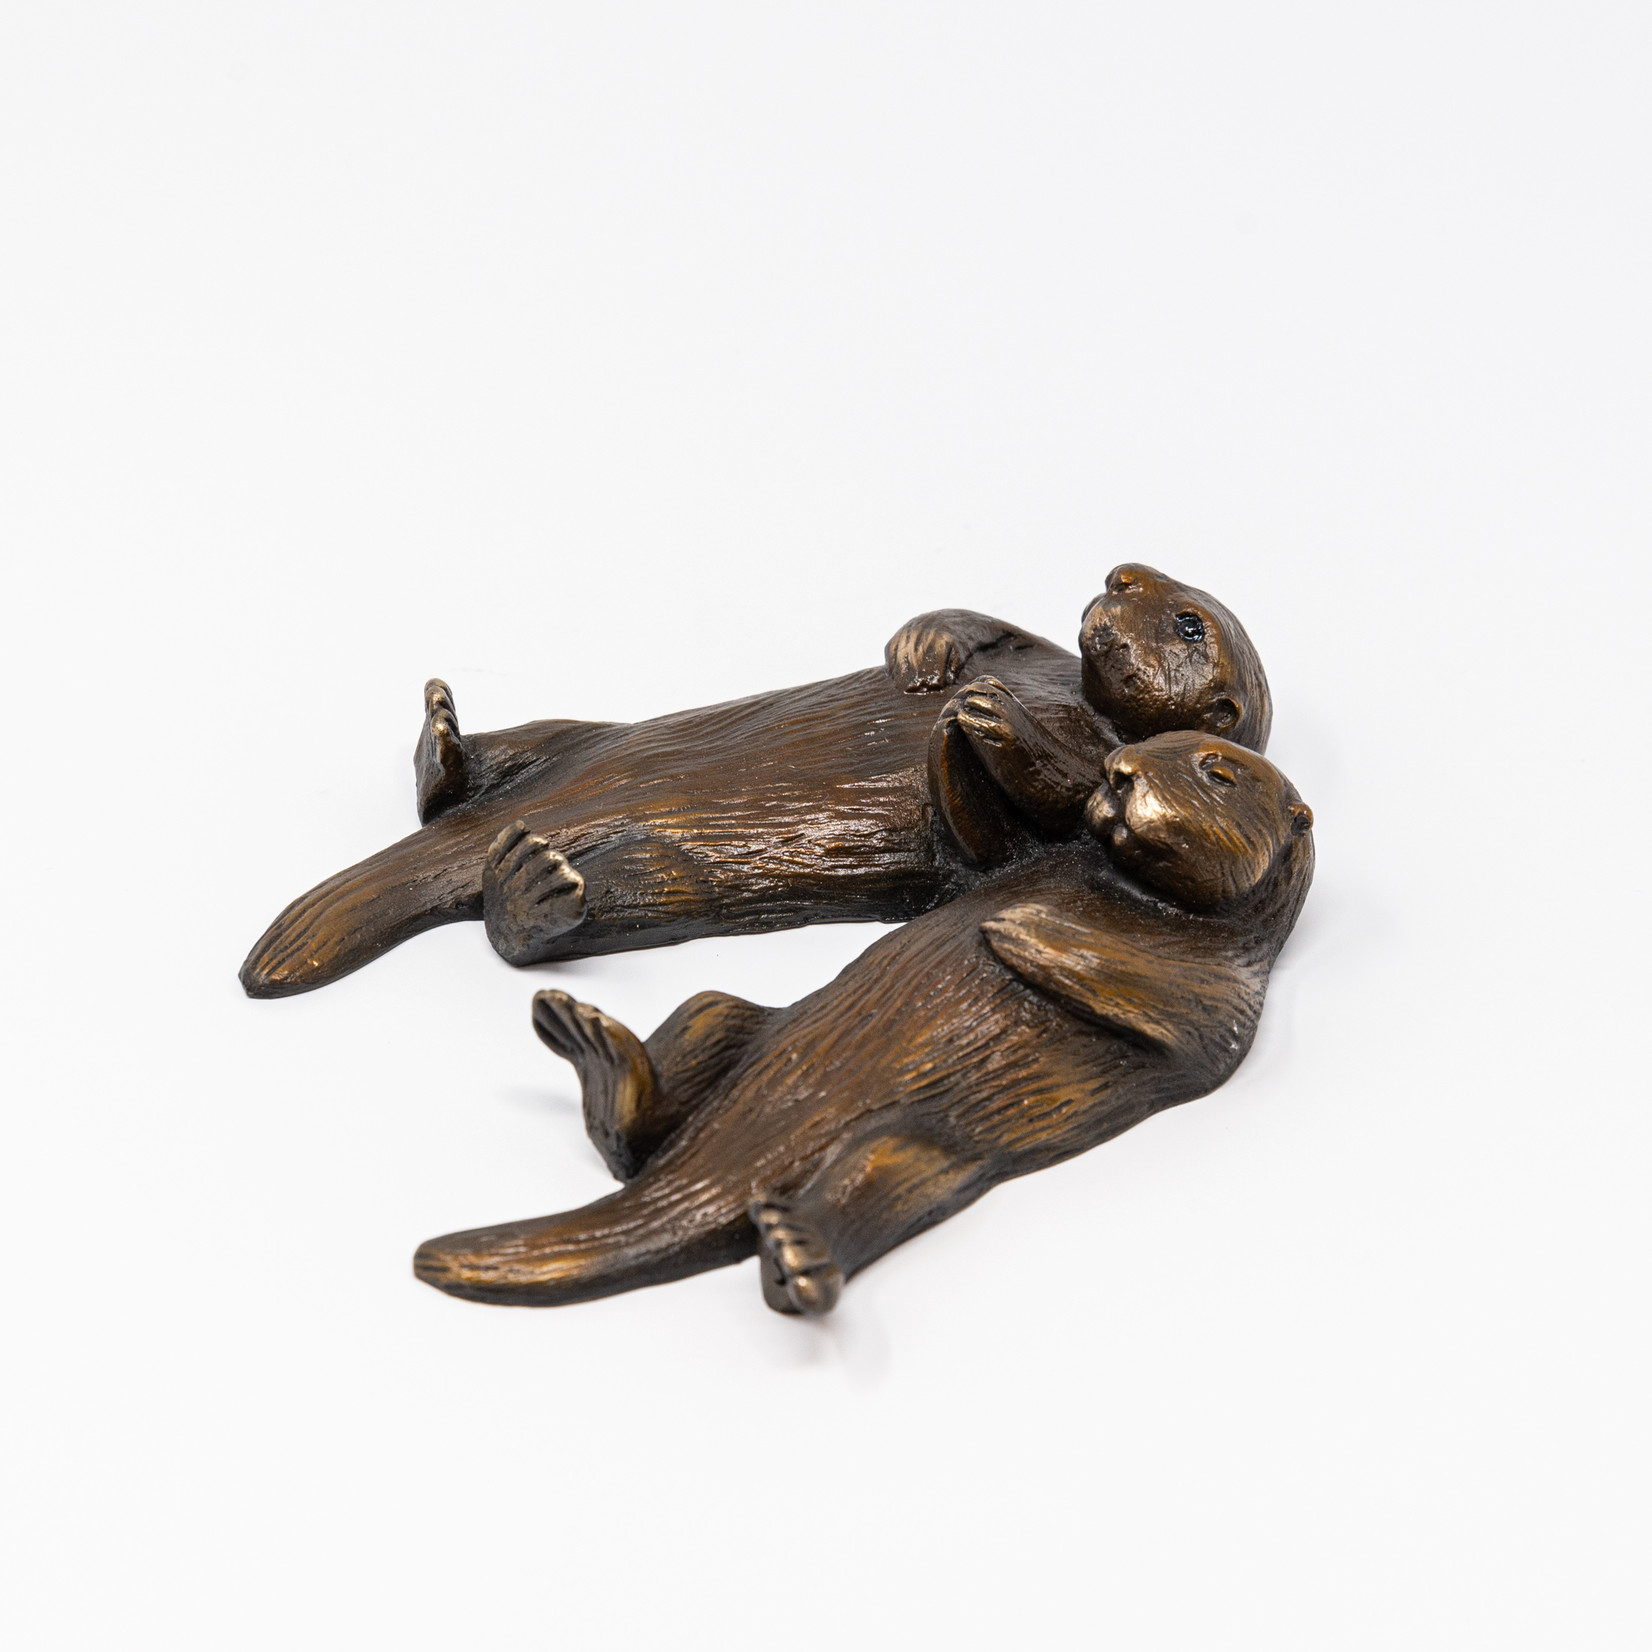 Sculpture by Nathan Scott Two "Wee" Otters Holding Hands